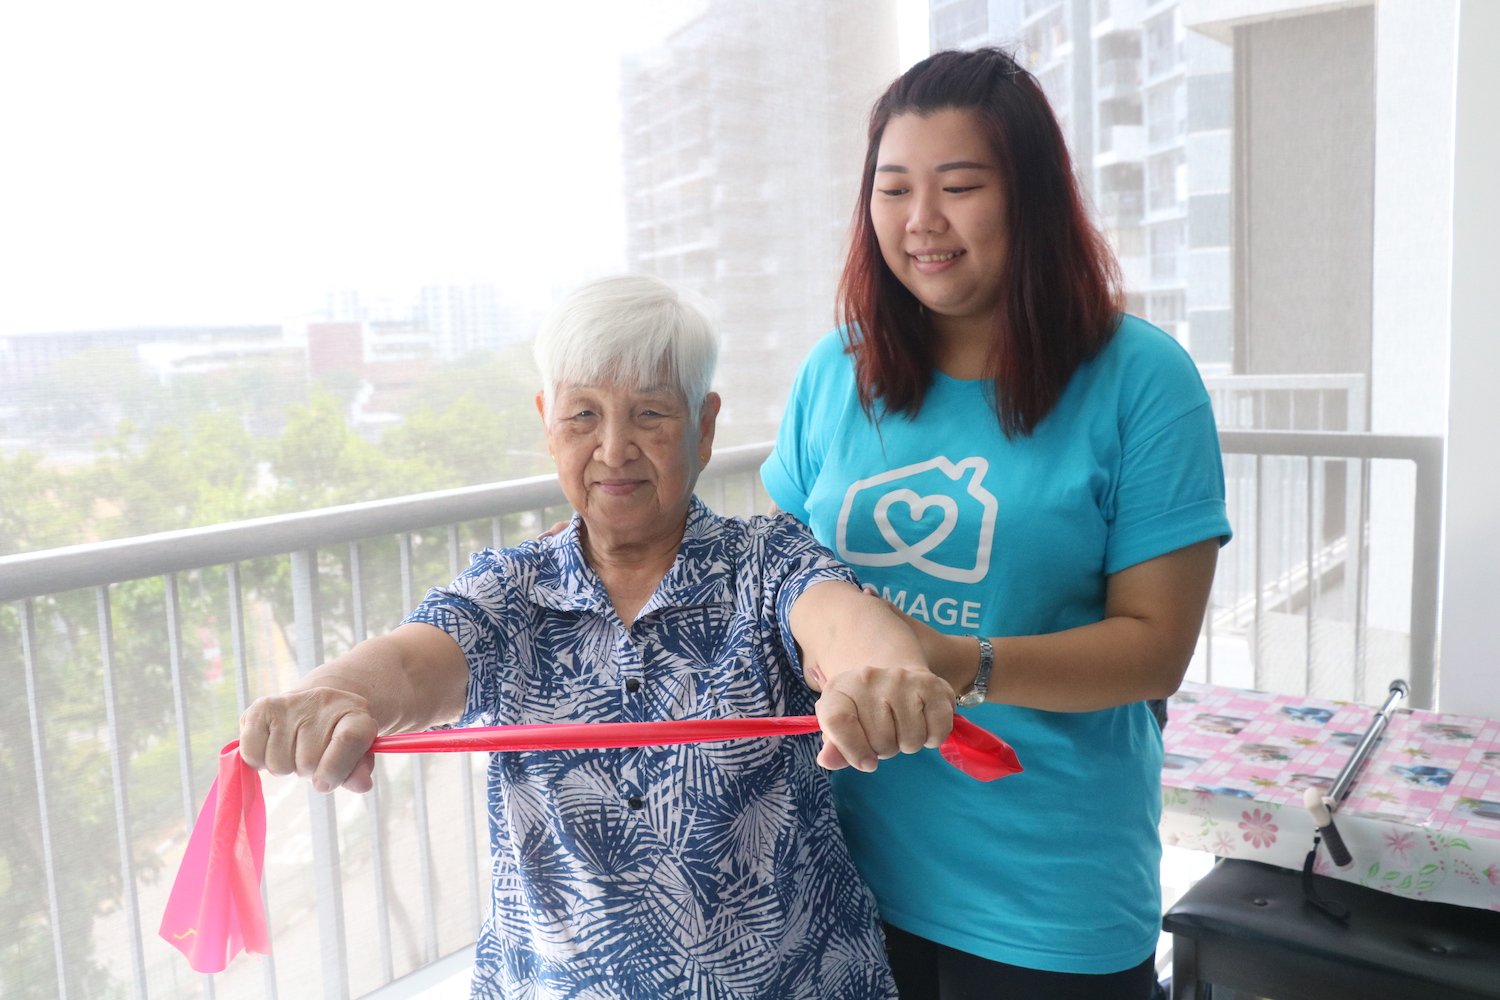 Homage Care Professional helping elderly woman to stay physically active with resistance band exercises